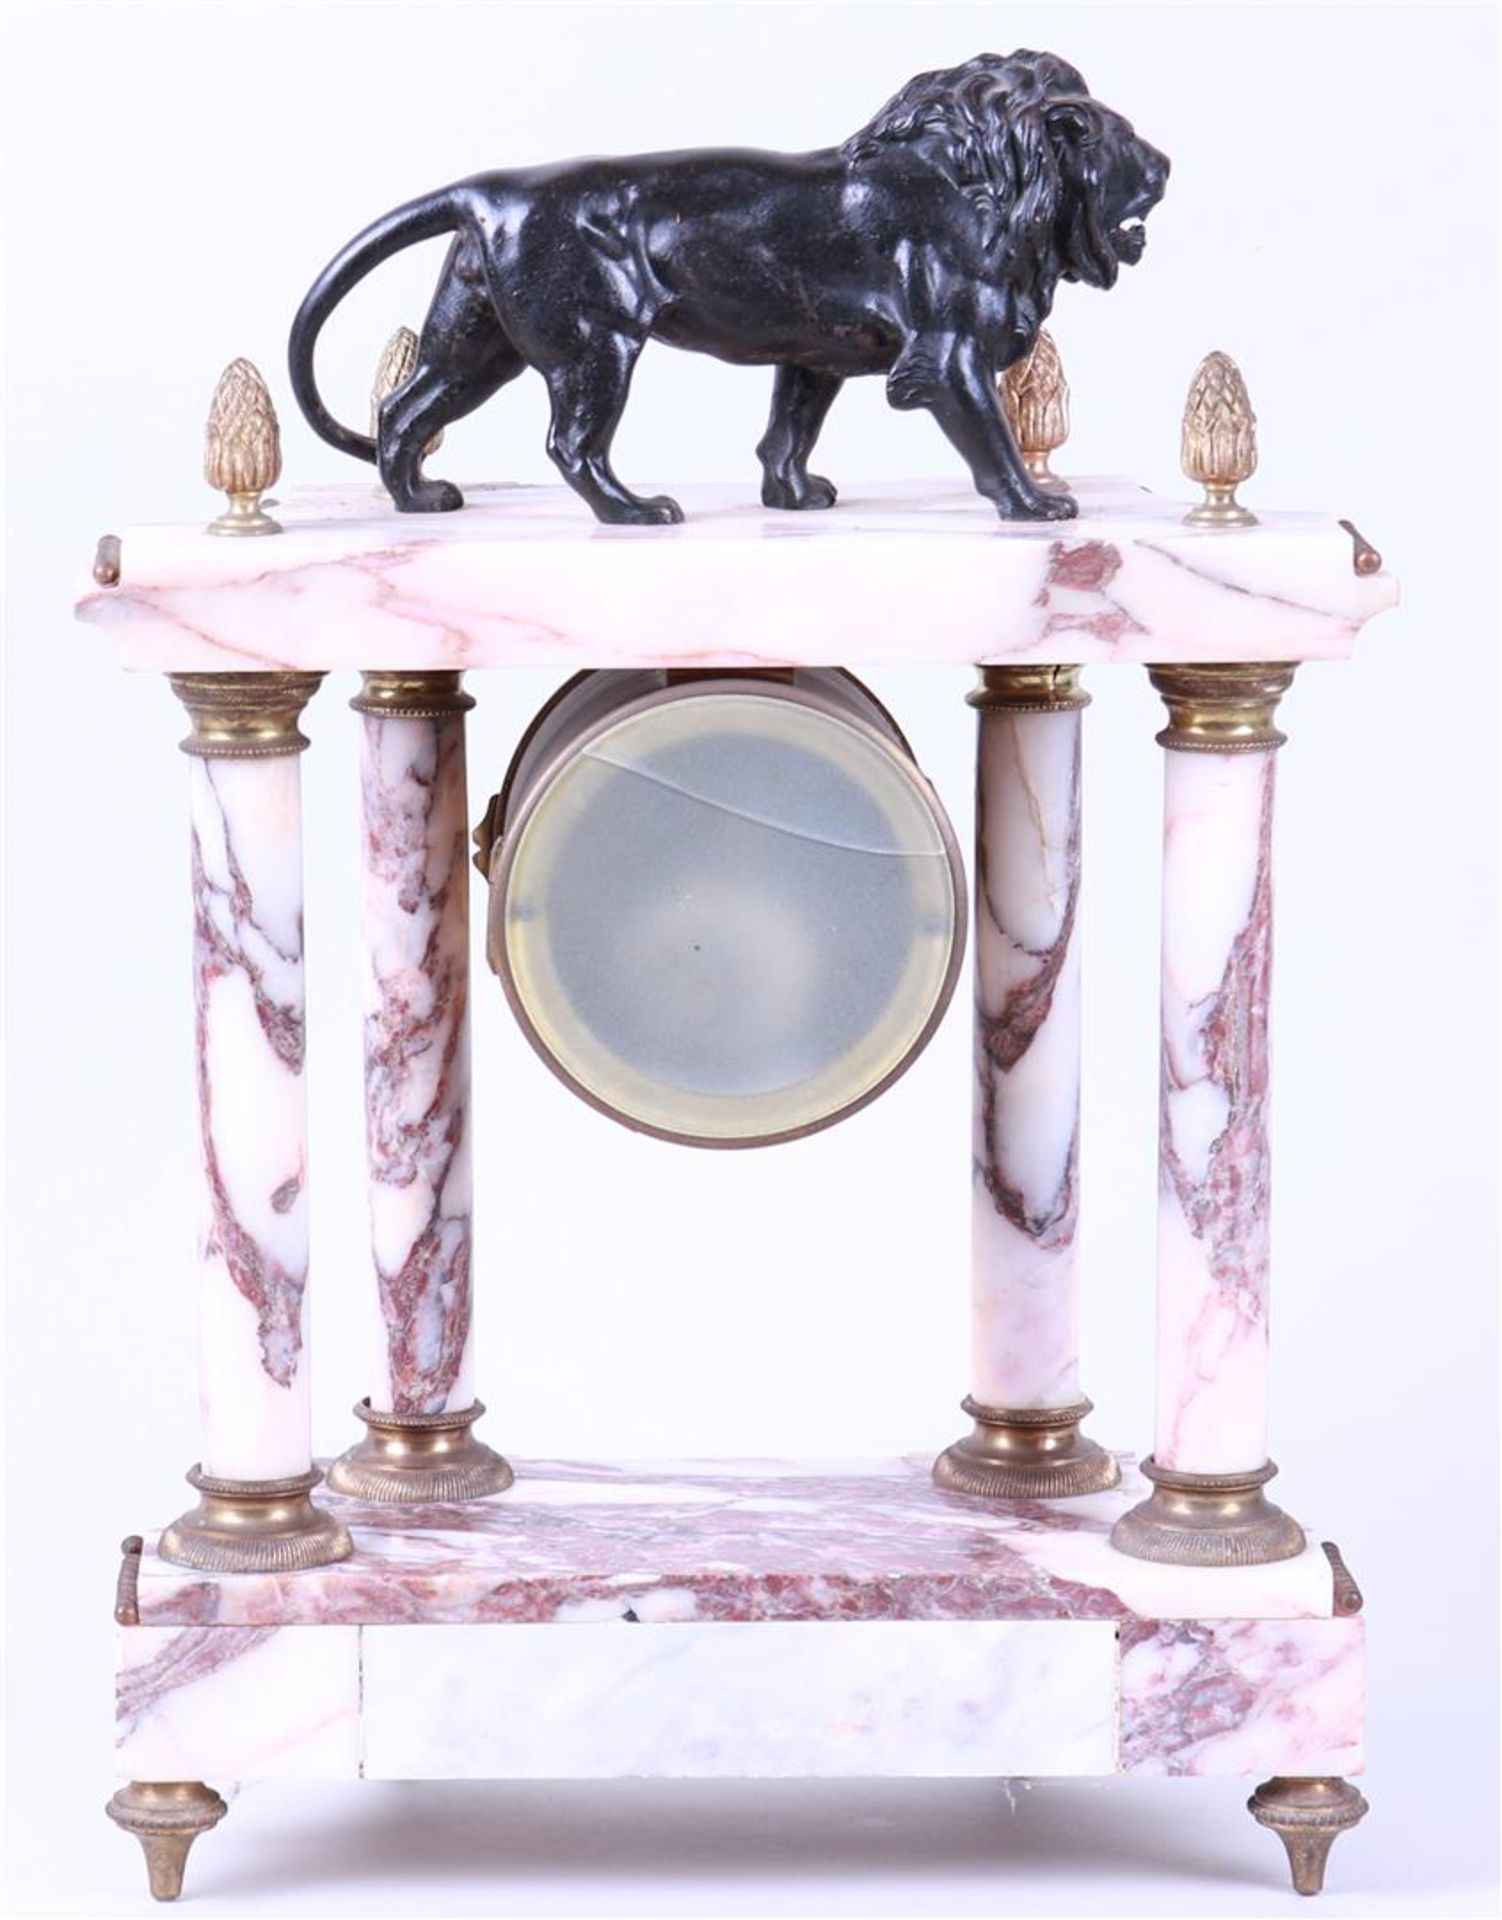 Majestic Lion-Topped Marble Column Clock: A 19th Century Mantel Timepiece - Image 3 of 3